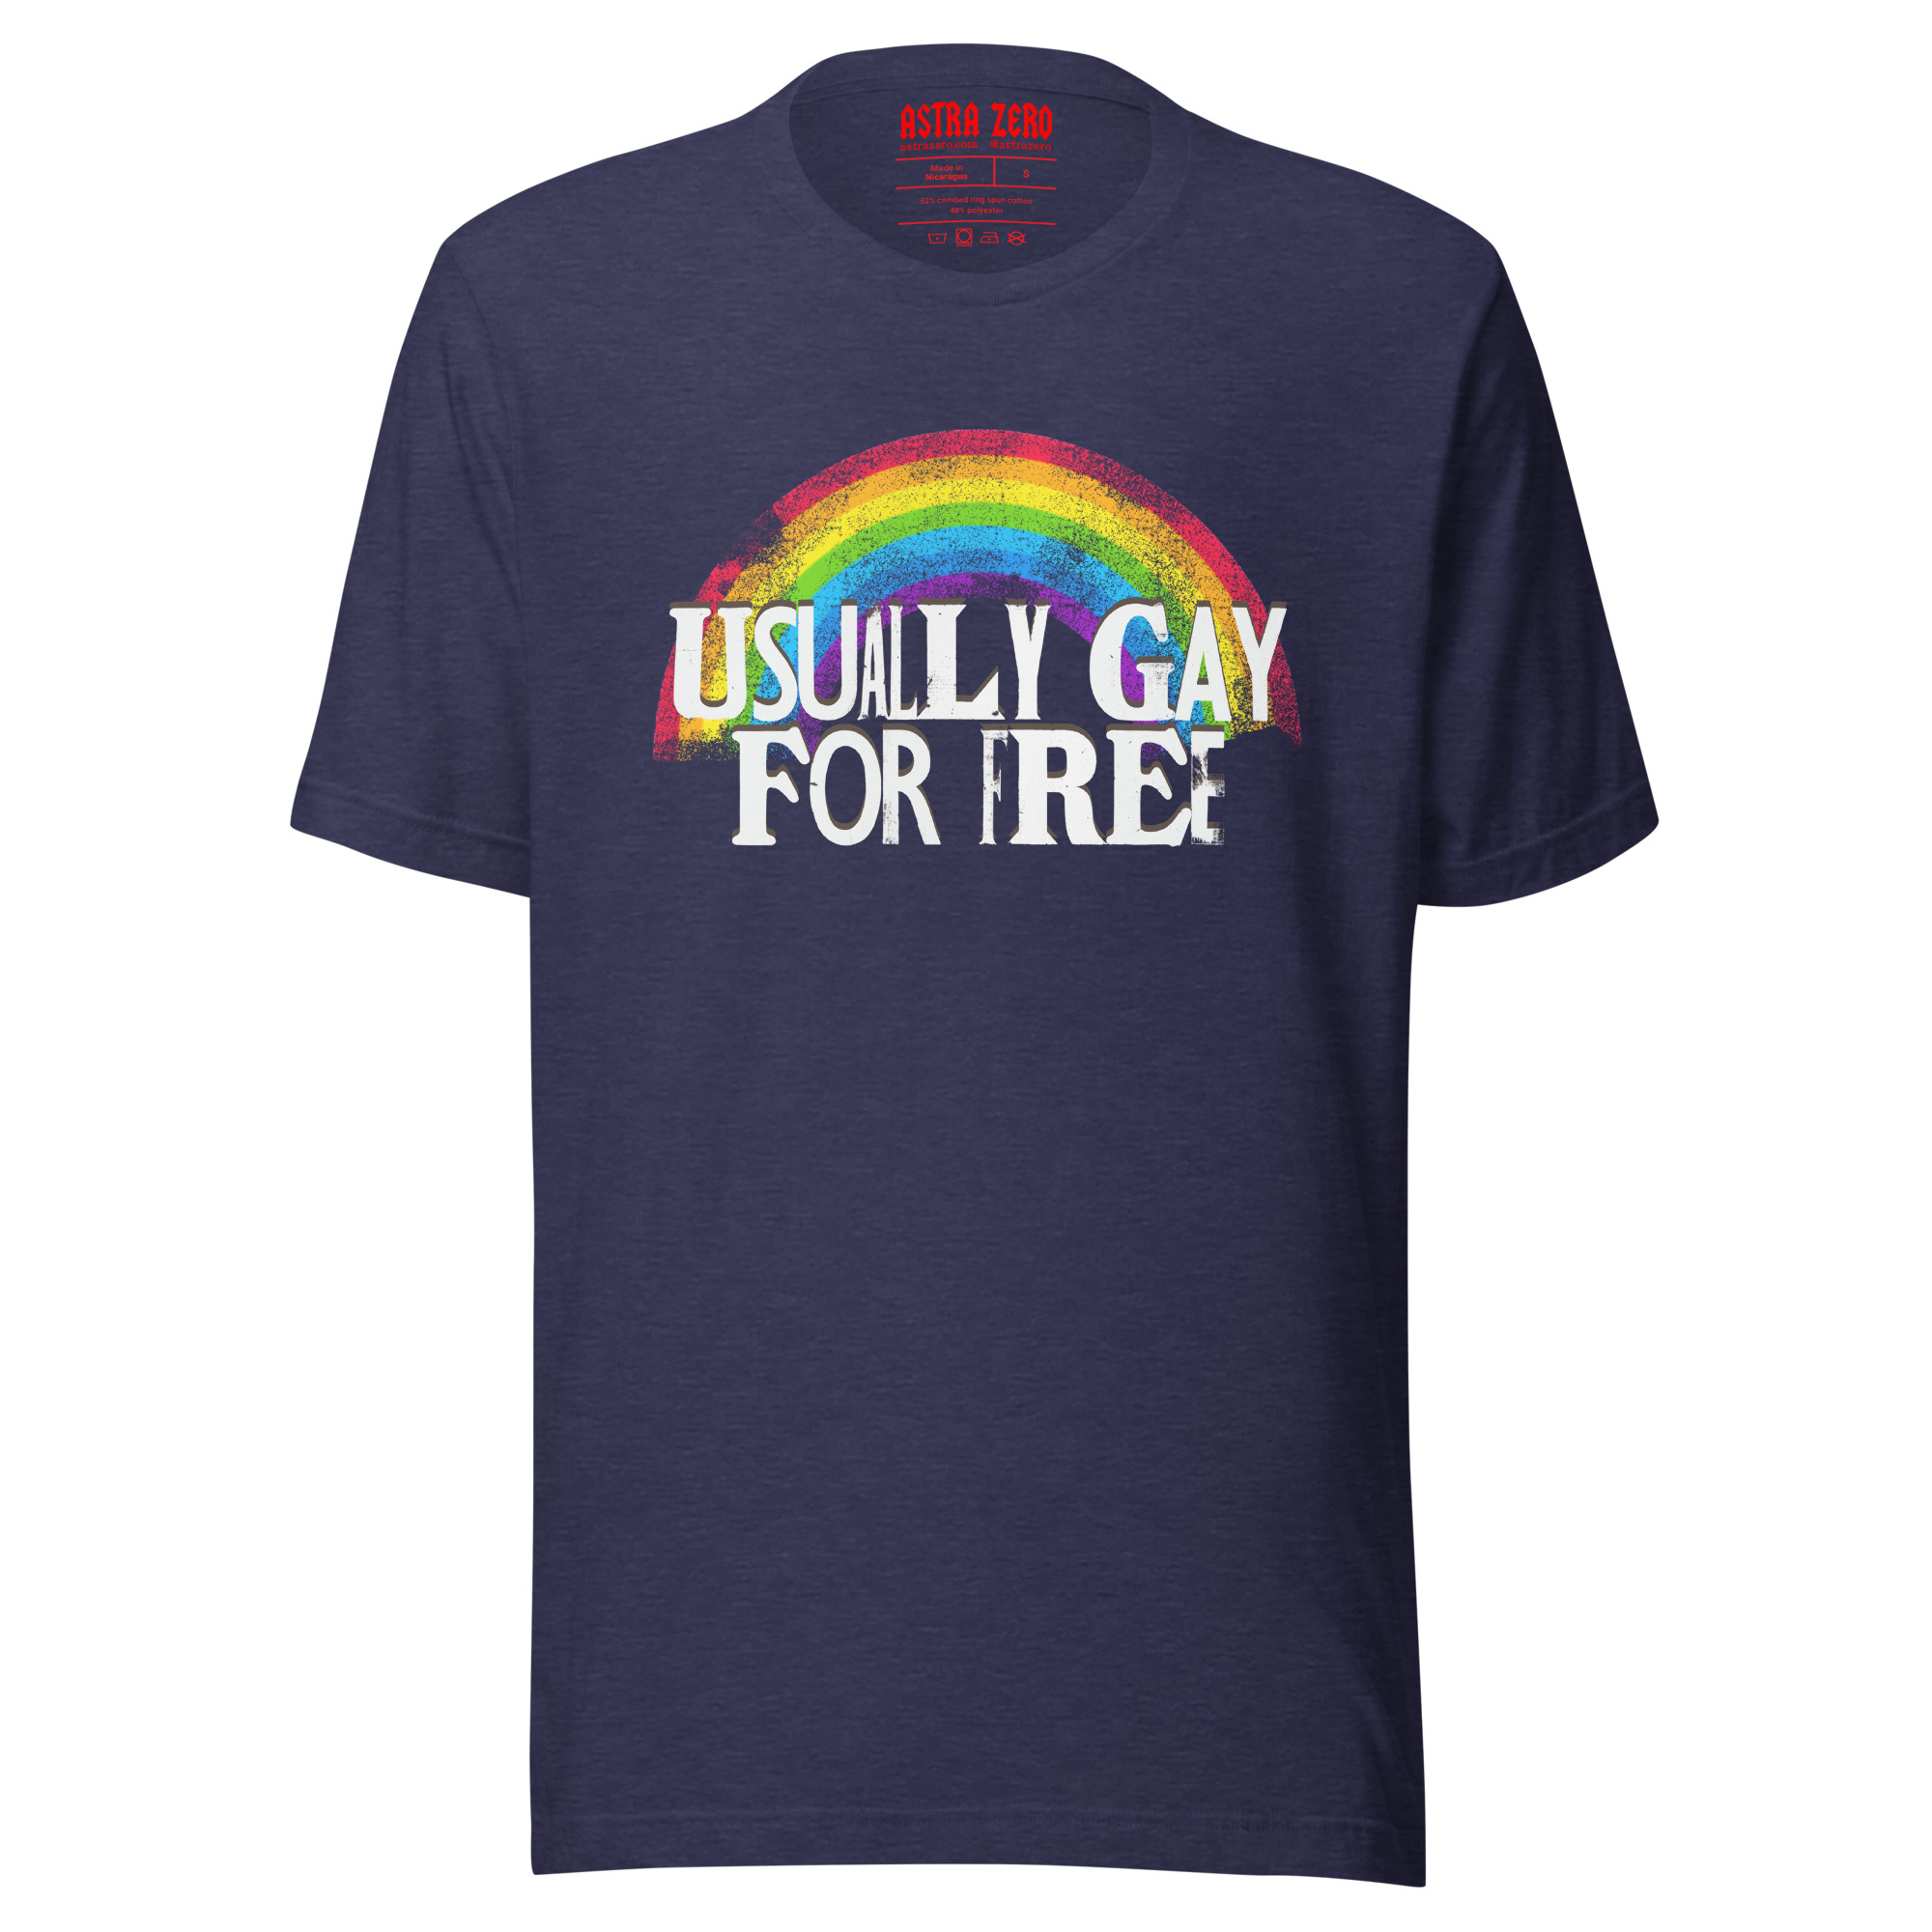 Featured image for “Usually Gay for Free - Unisex t-shirt”